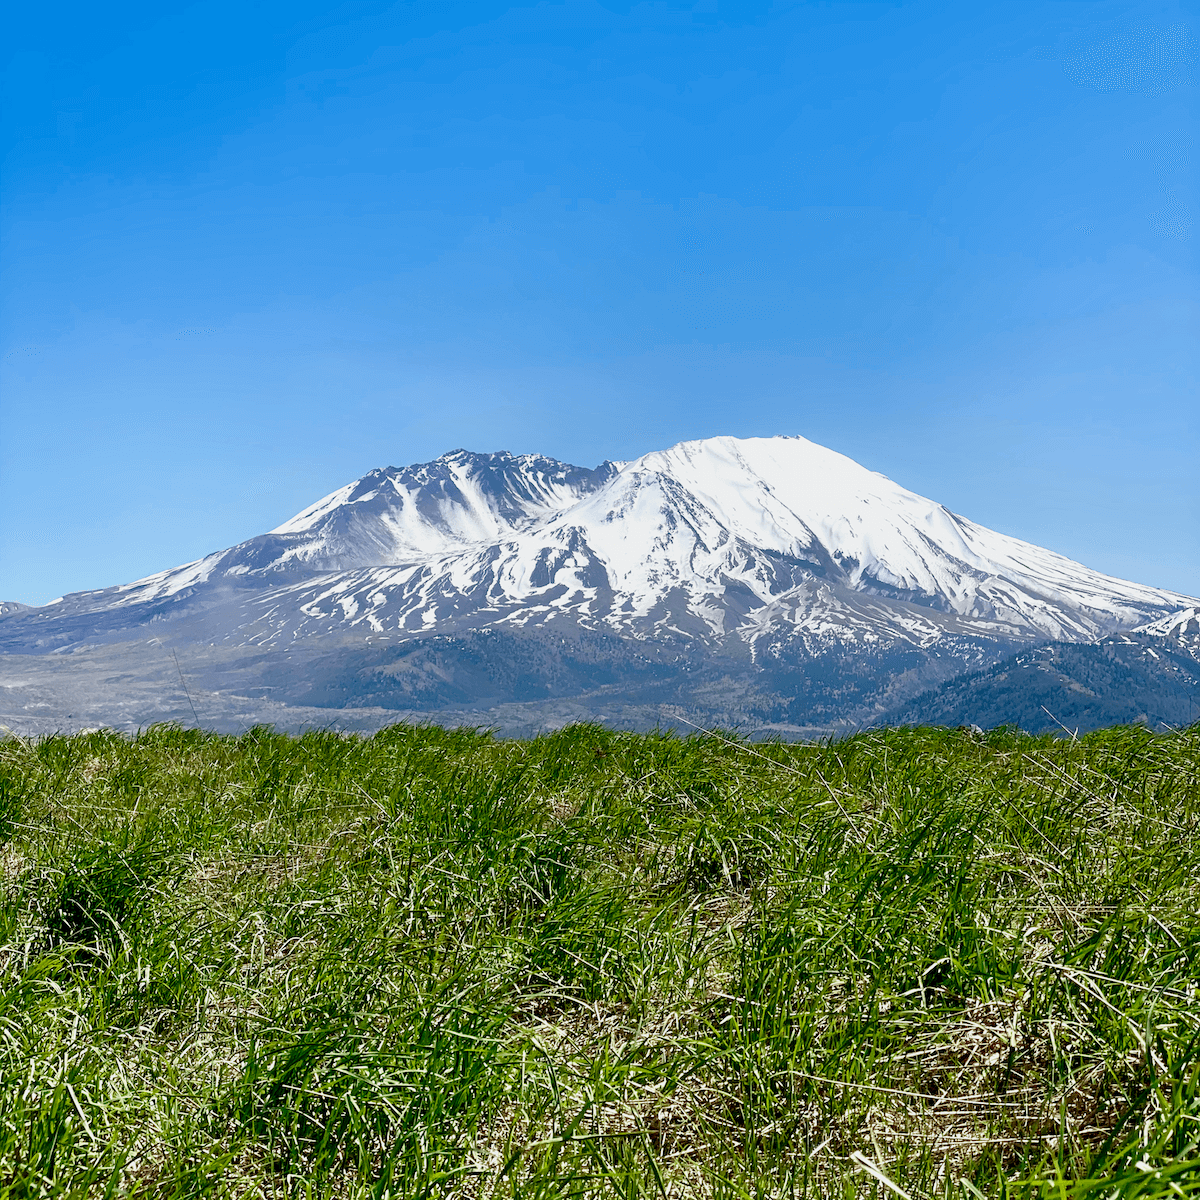 Mt. St. Helens rises up above a field of bright green grass while the blue sky shines above. There is snow on the mountain.